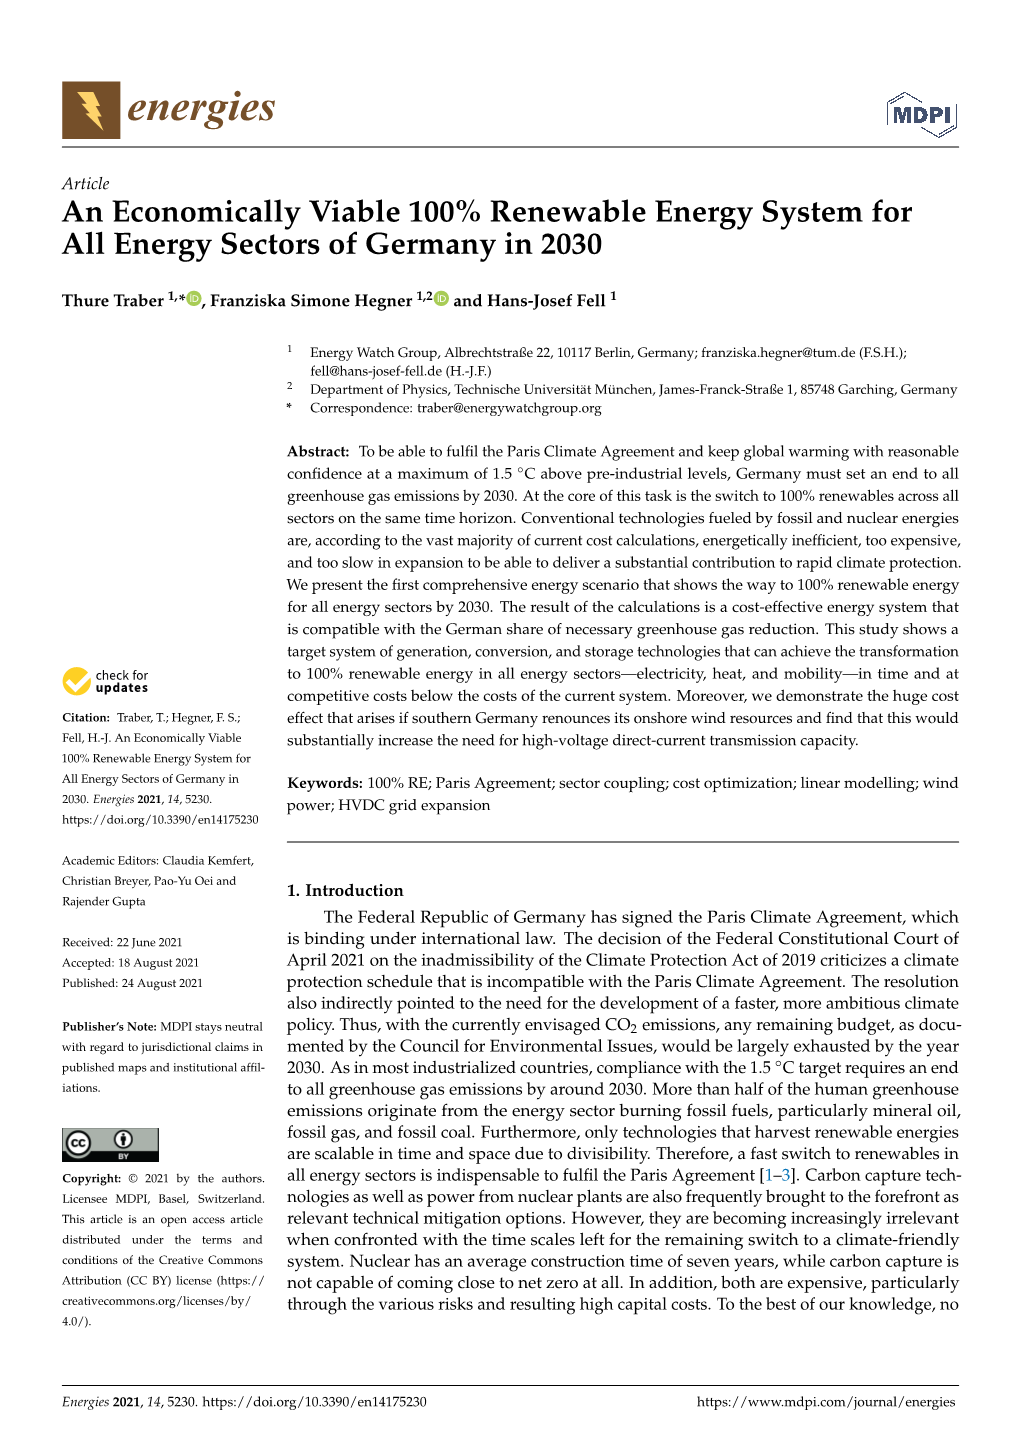 An Economically Viable 100% Renewable Energy System for All Energy Sectors of Germany in 2030